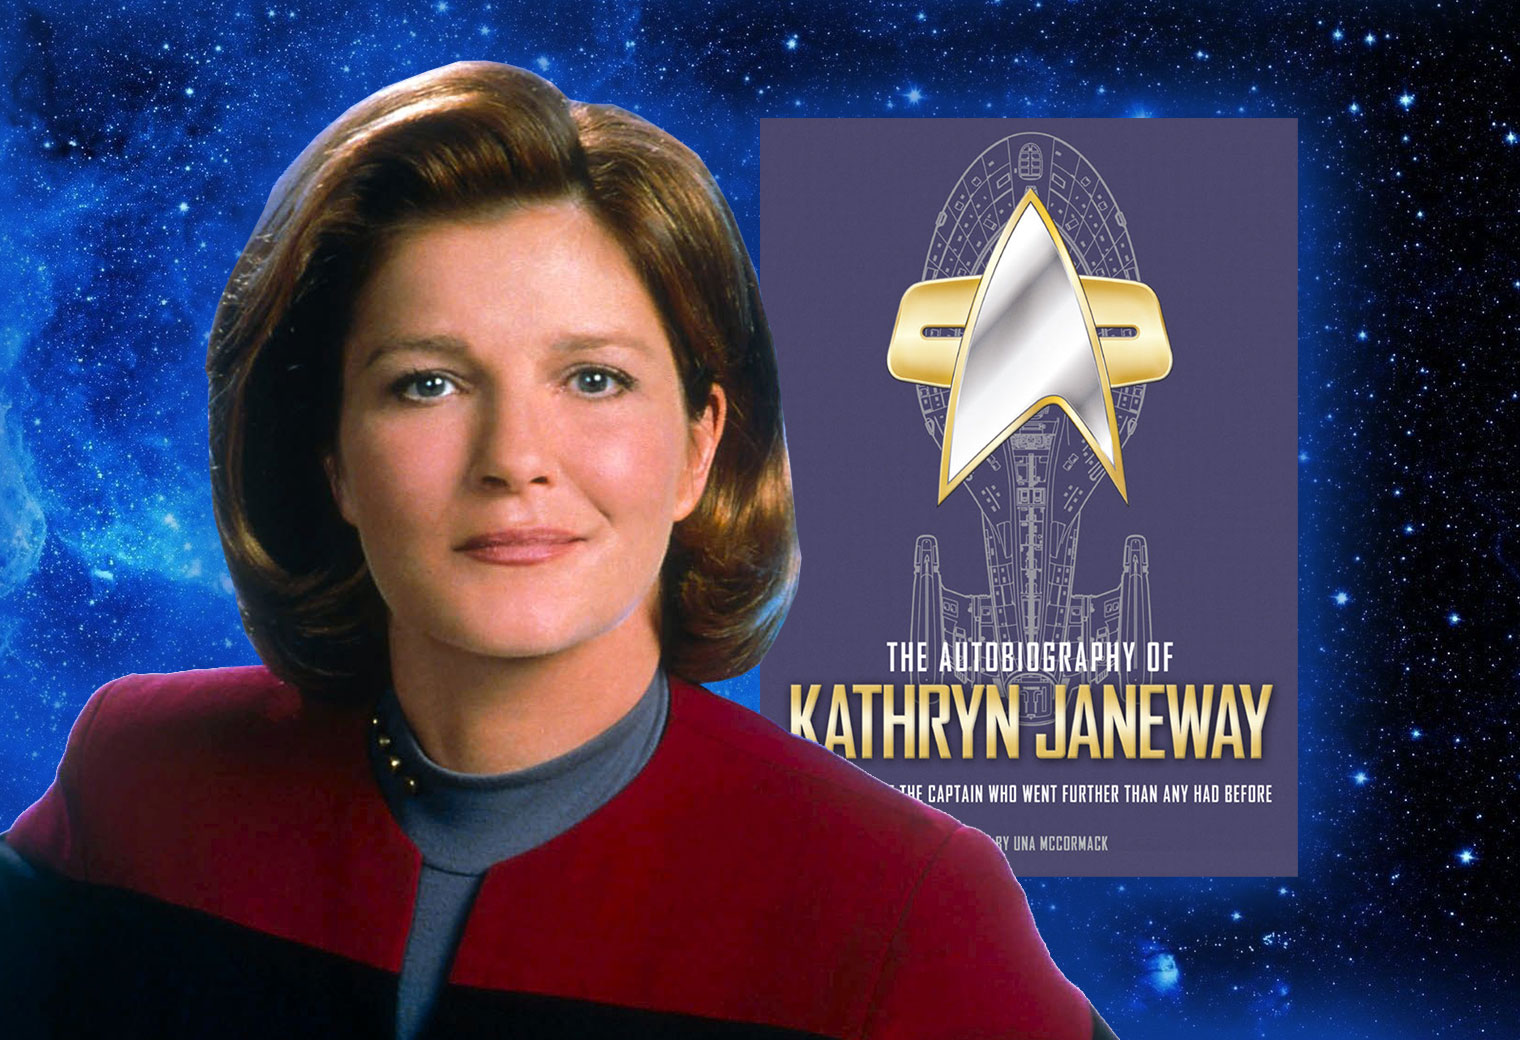 [REVIEW] The Autobiography of Kathryn Janeway: Delving Into the Life and Times of Star Trek’s Legendary Captain